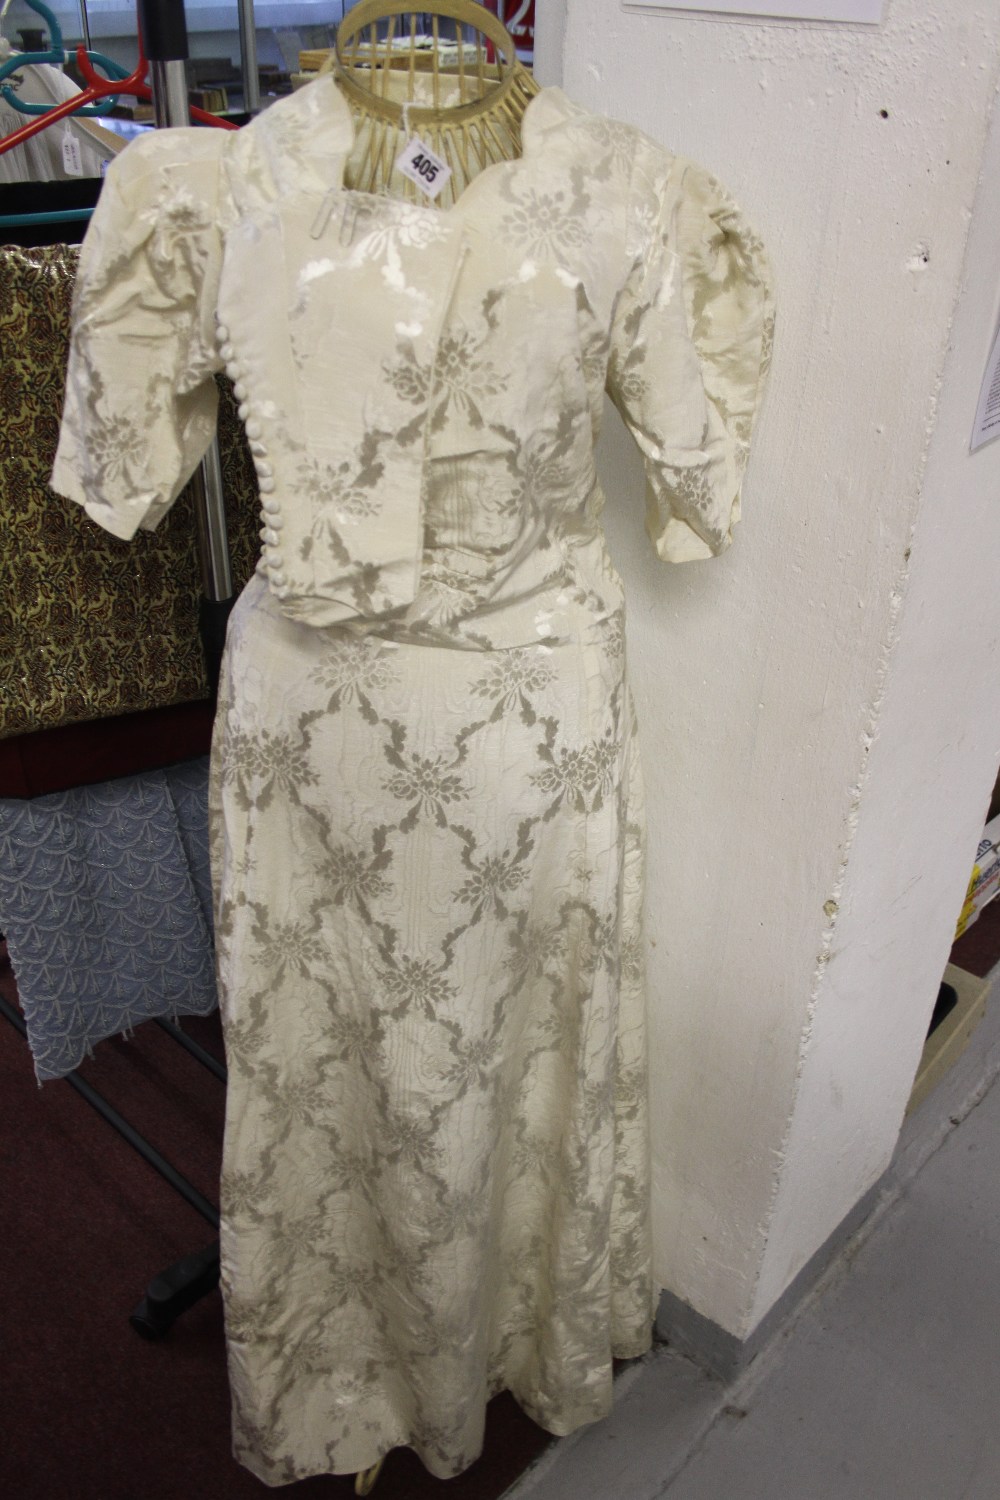 Textiles: 1930/40s Wedding dress, elbow length sleeves, heart shape neck line, panel skirt with